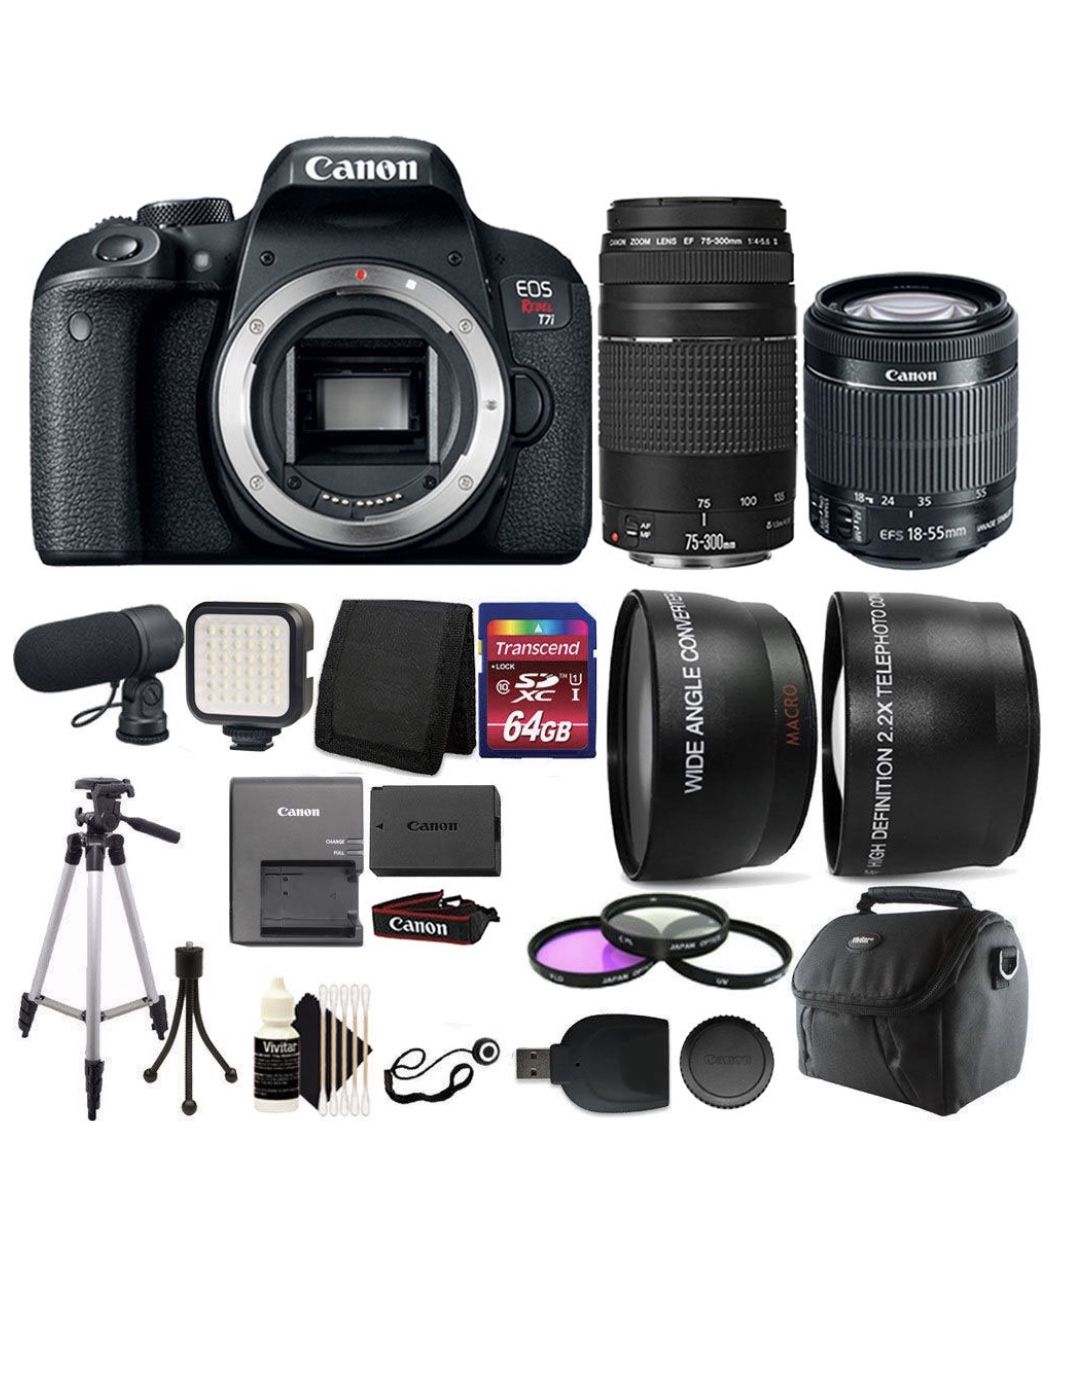 Canon EOS Rebel T7i 24.2MP Digital SLR Wifi Enabled Camera Black with EF-S 18-55 IS STM and EF 75-300mm Lenses + Accessory Kit+ 50 mm lens